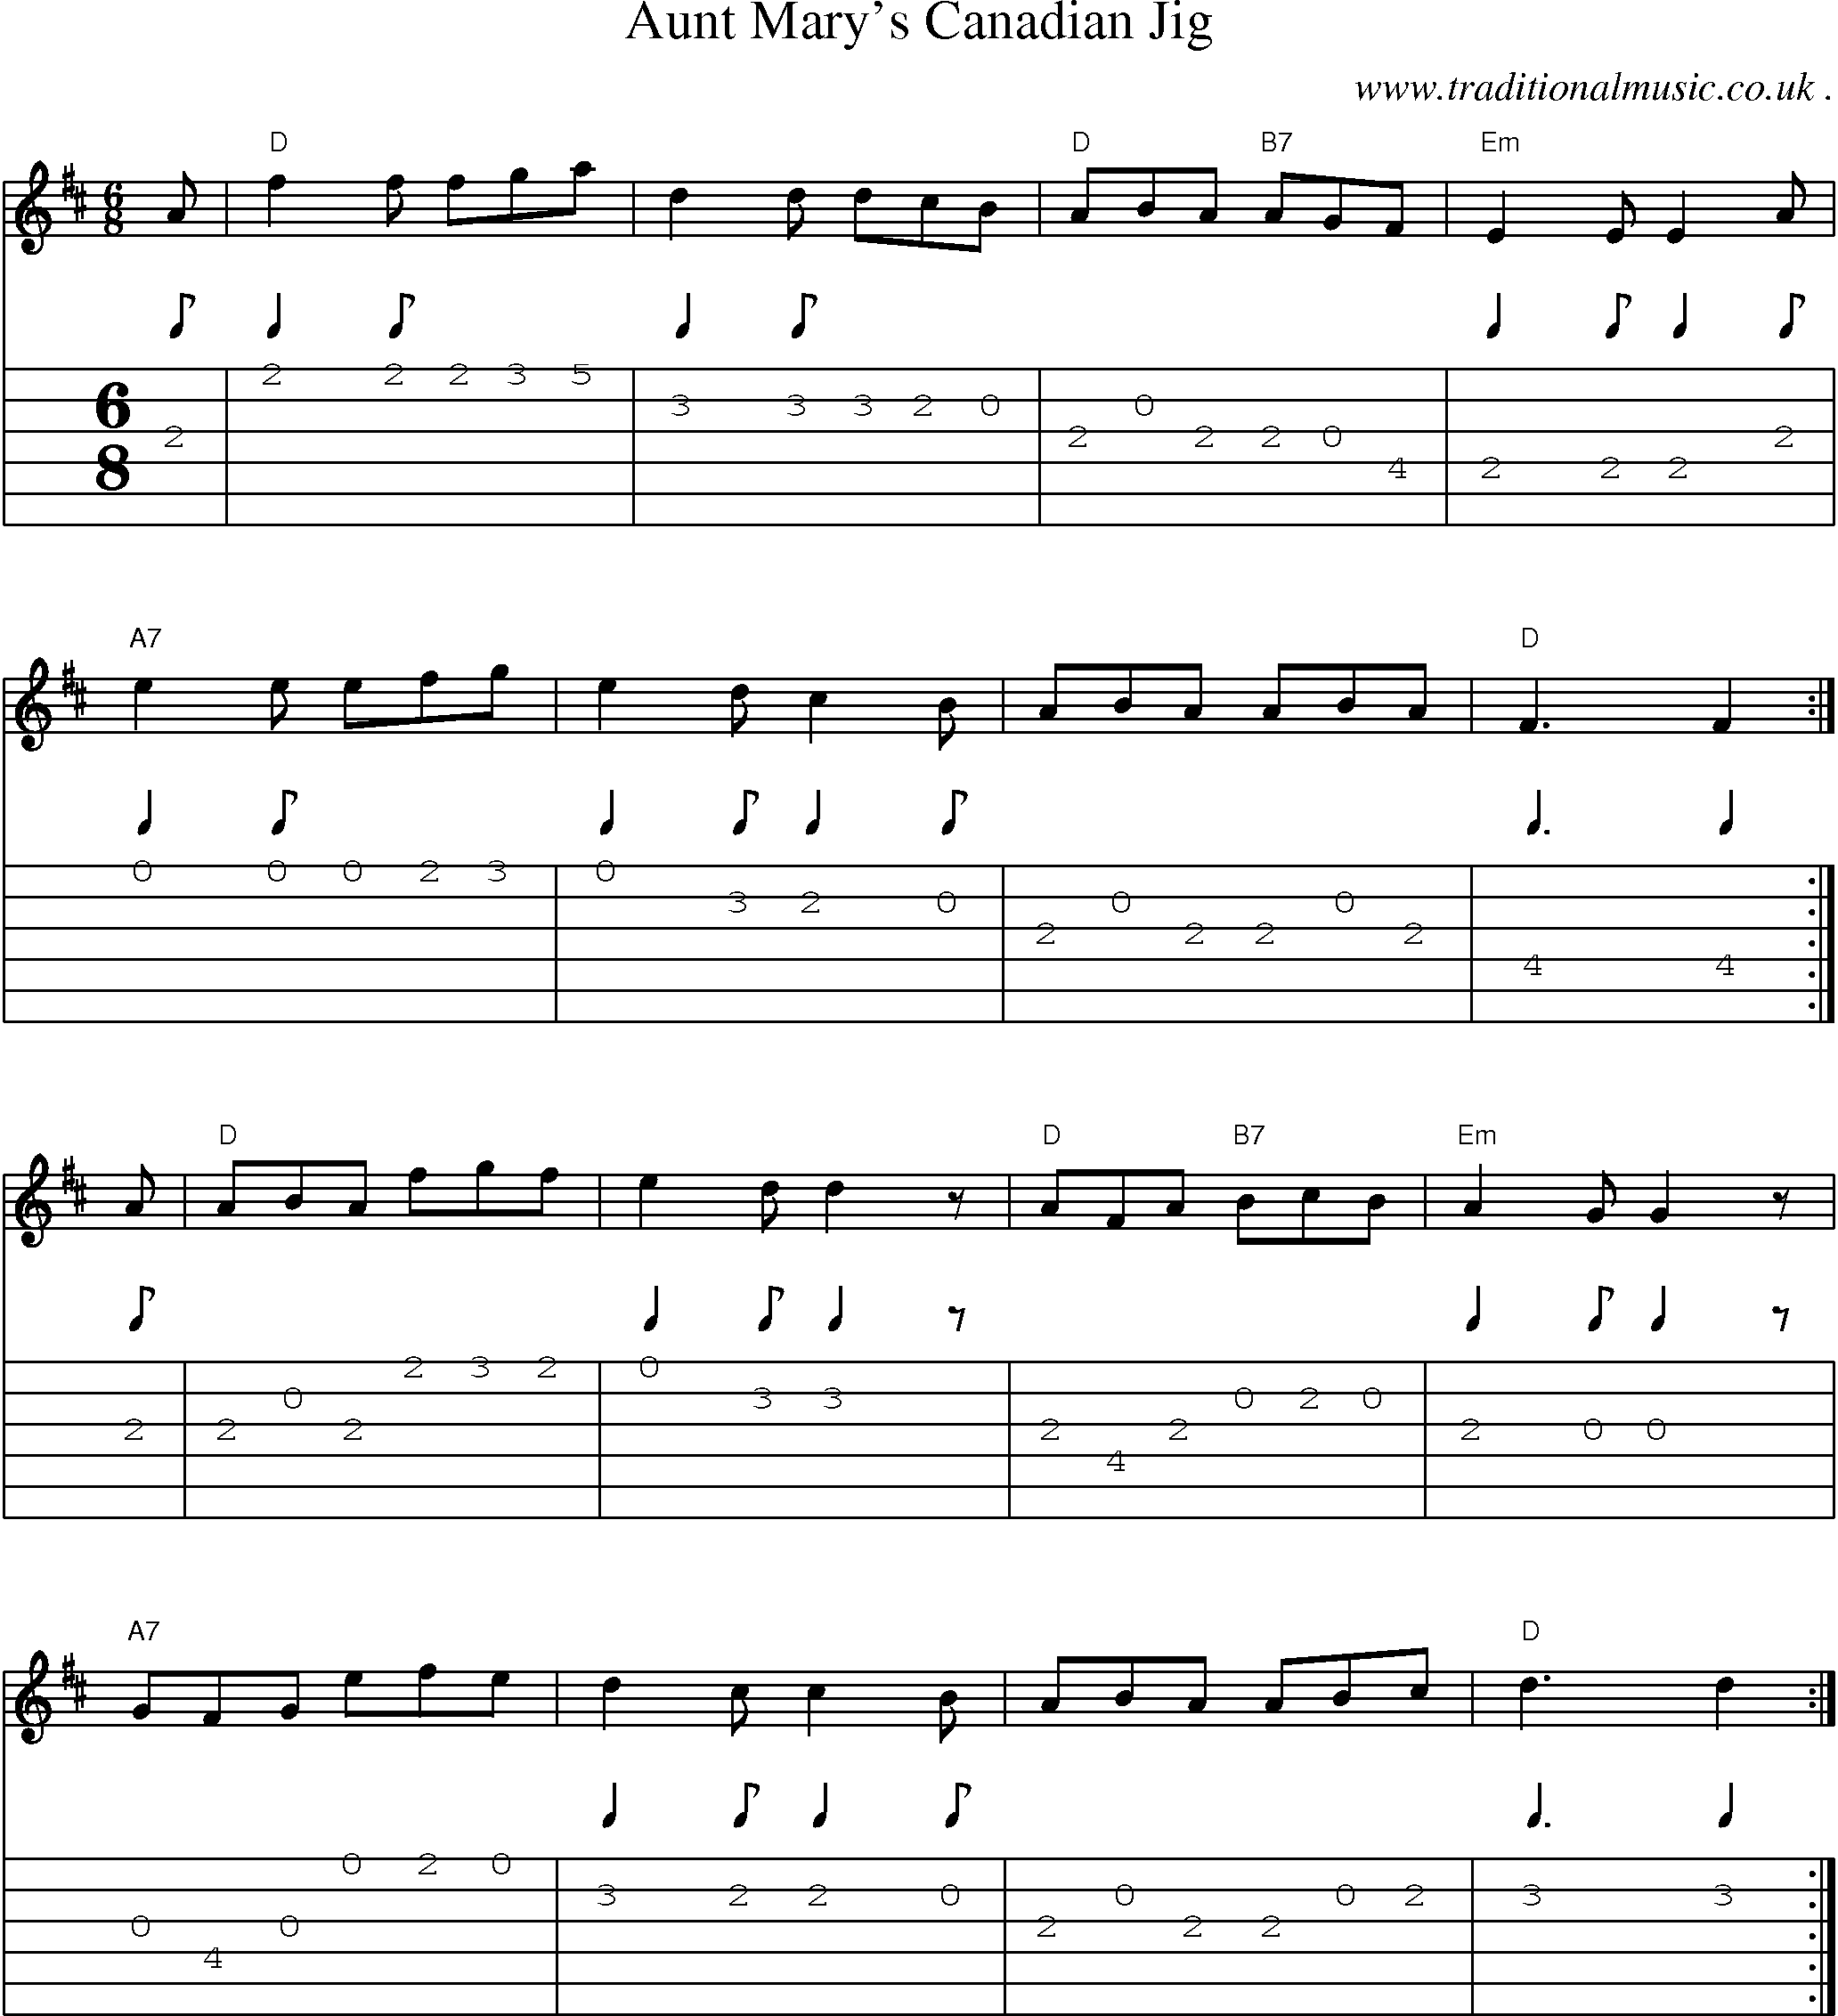 Music Score and Guitar Tabs for Aunt Marys Canadian Jig